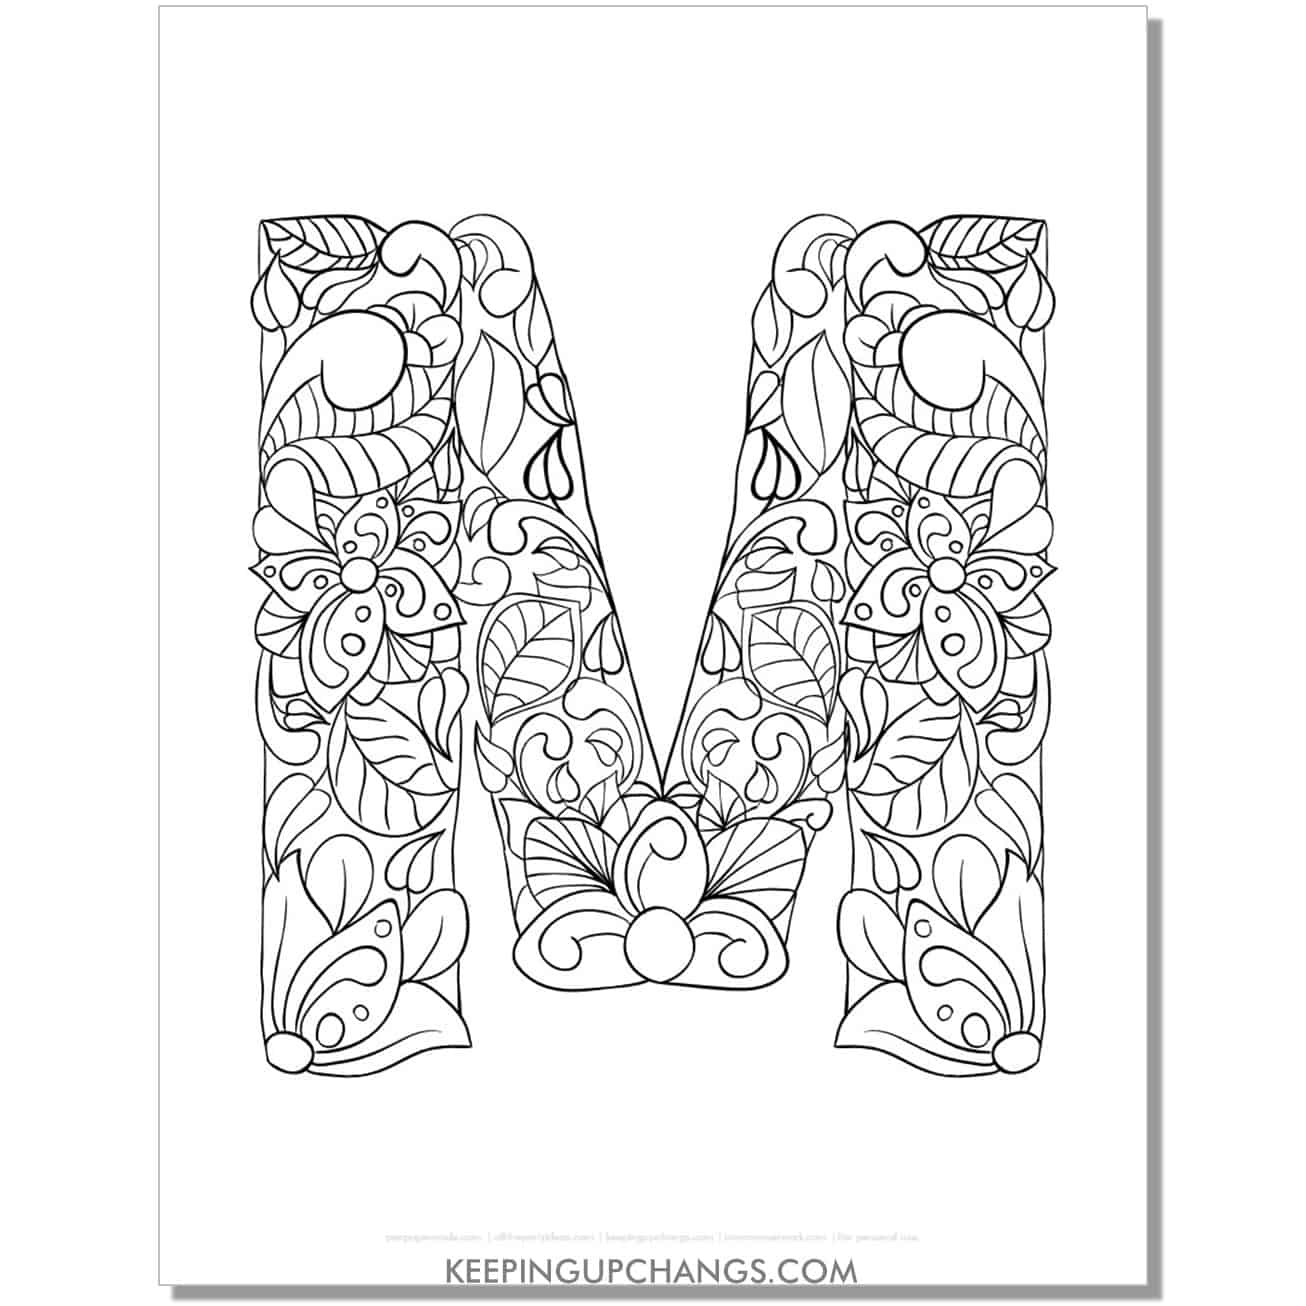 free abc m to color, complicated mandala zentangle for adults.